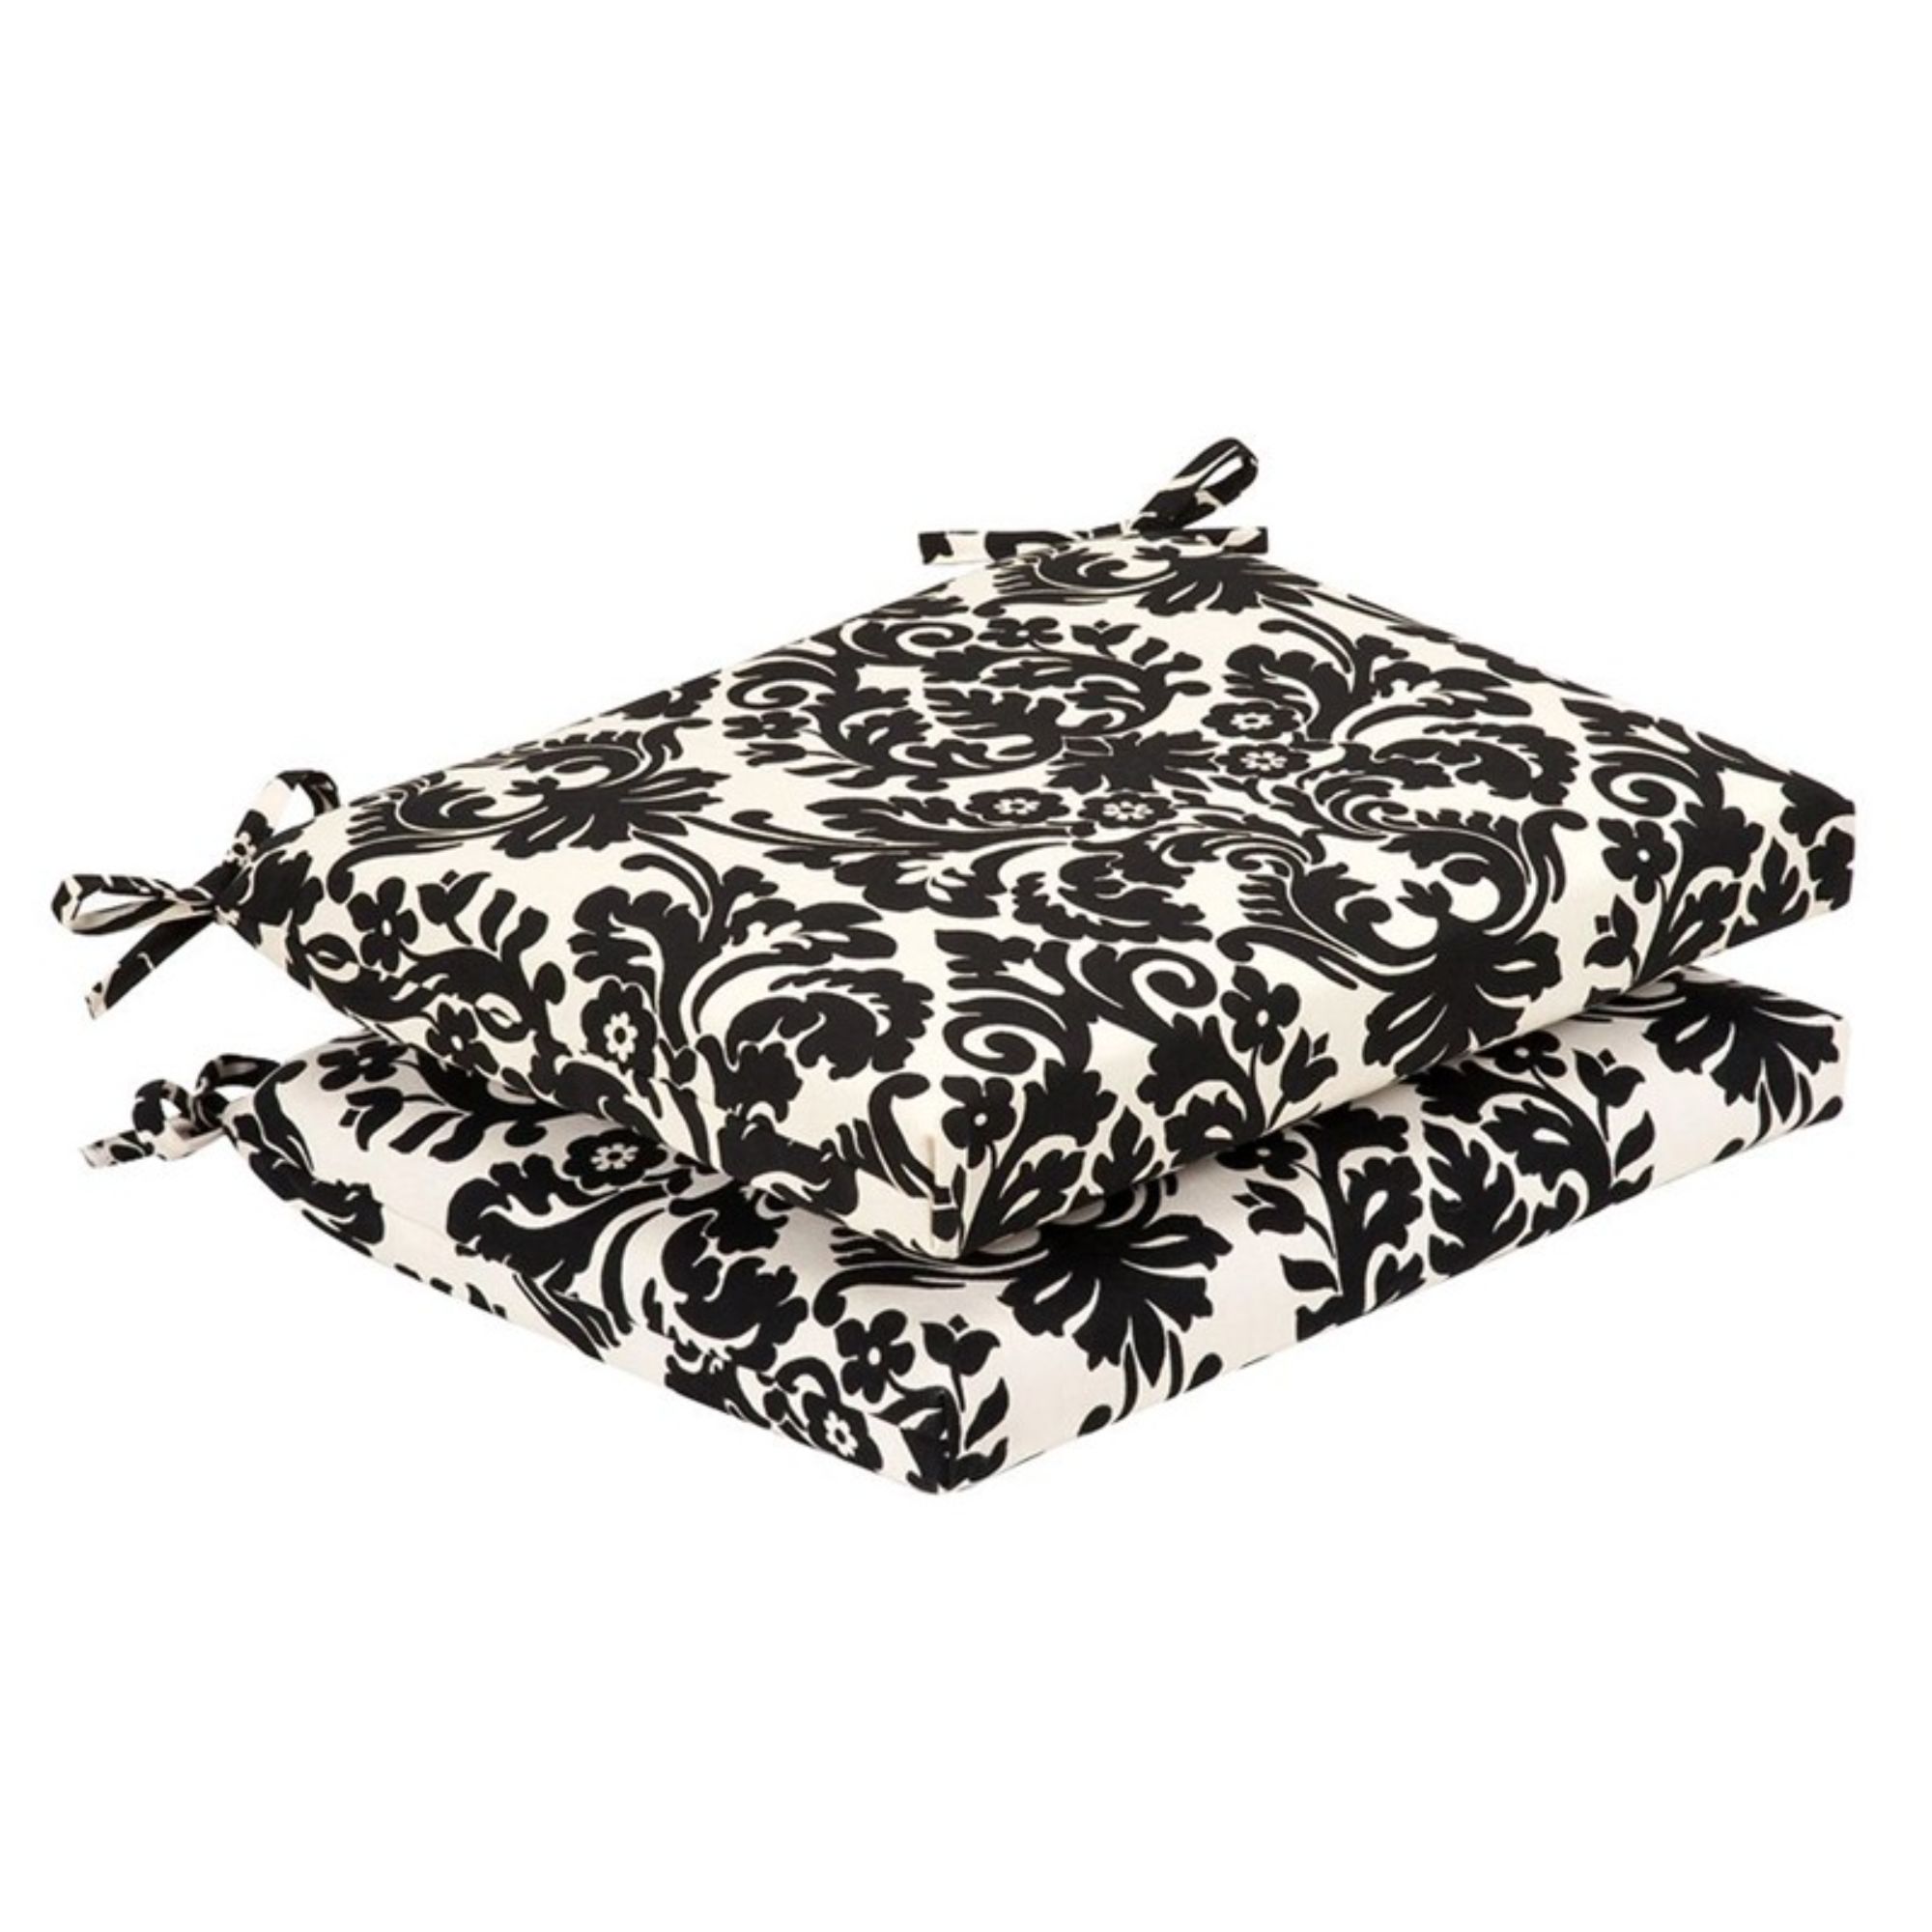 CC Home Furnishings Set of 2 Black and White Damask Patio Furniture Seat Cushions 18.5"